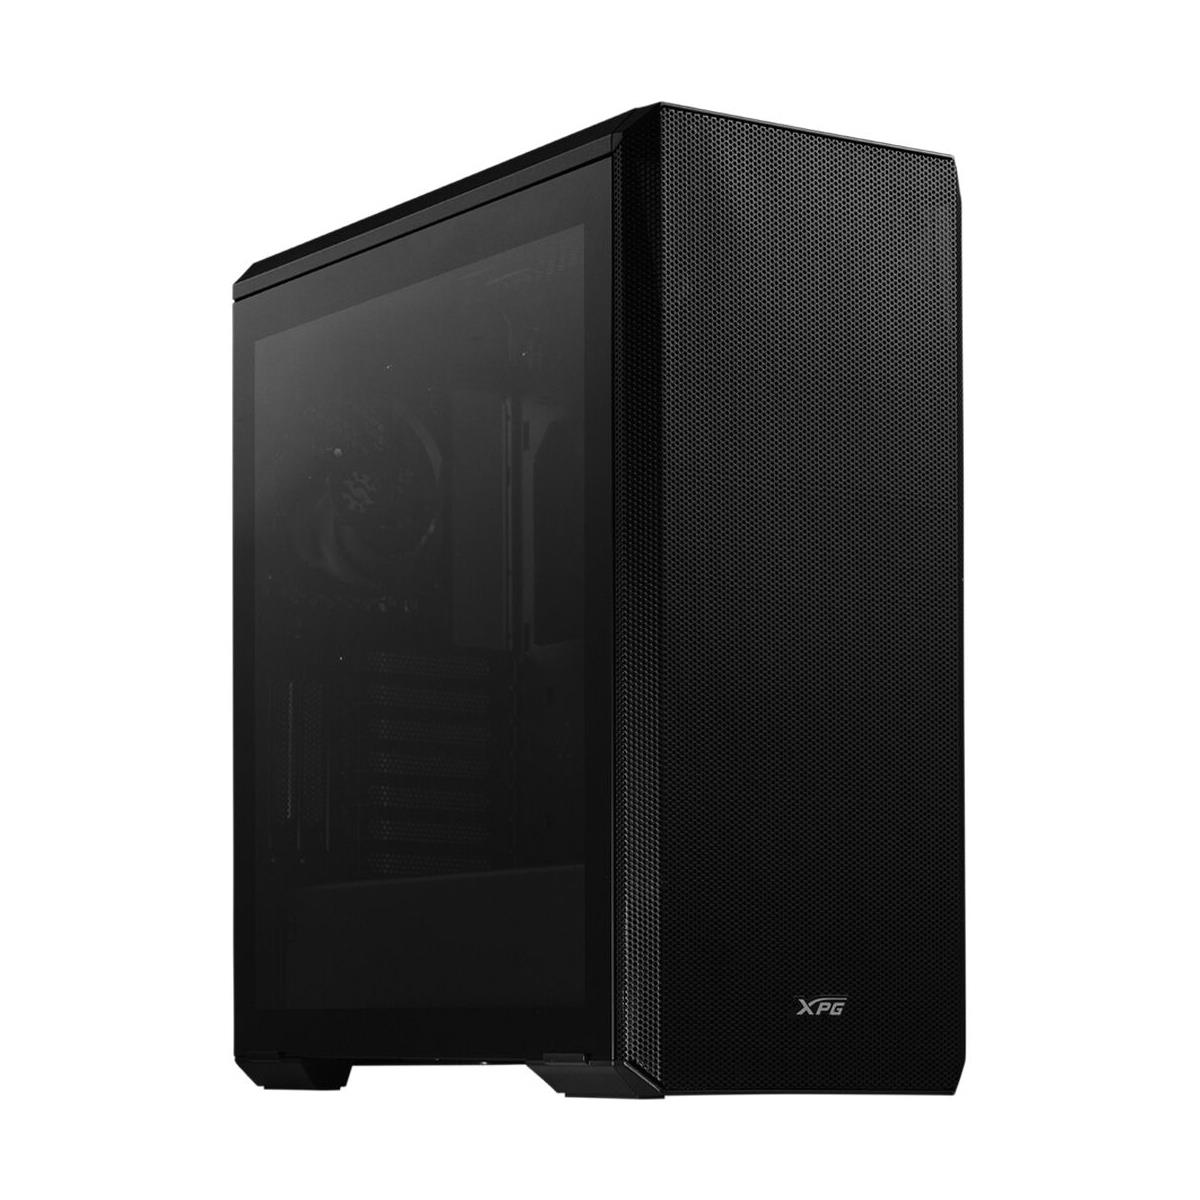 Image of XPG DEFENDER Tempered Glass E-ATX Mid-Tower Gaming Computer Case